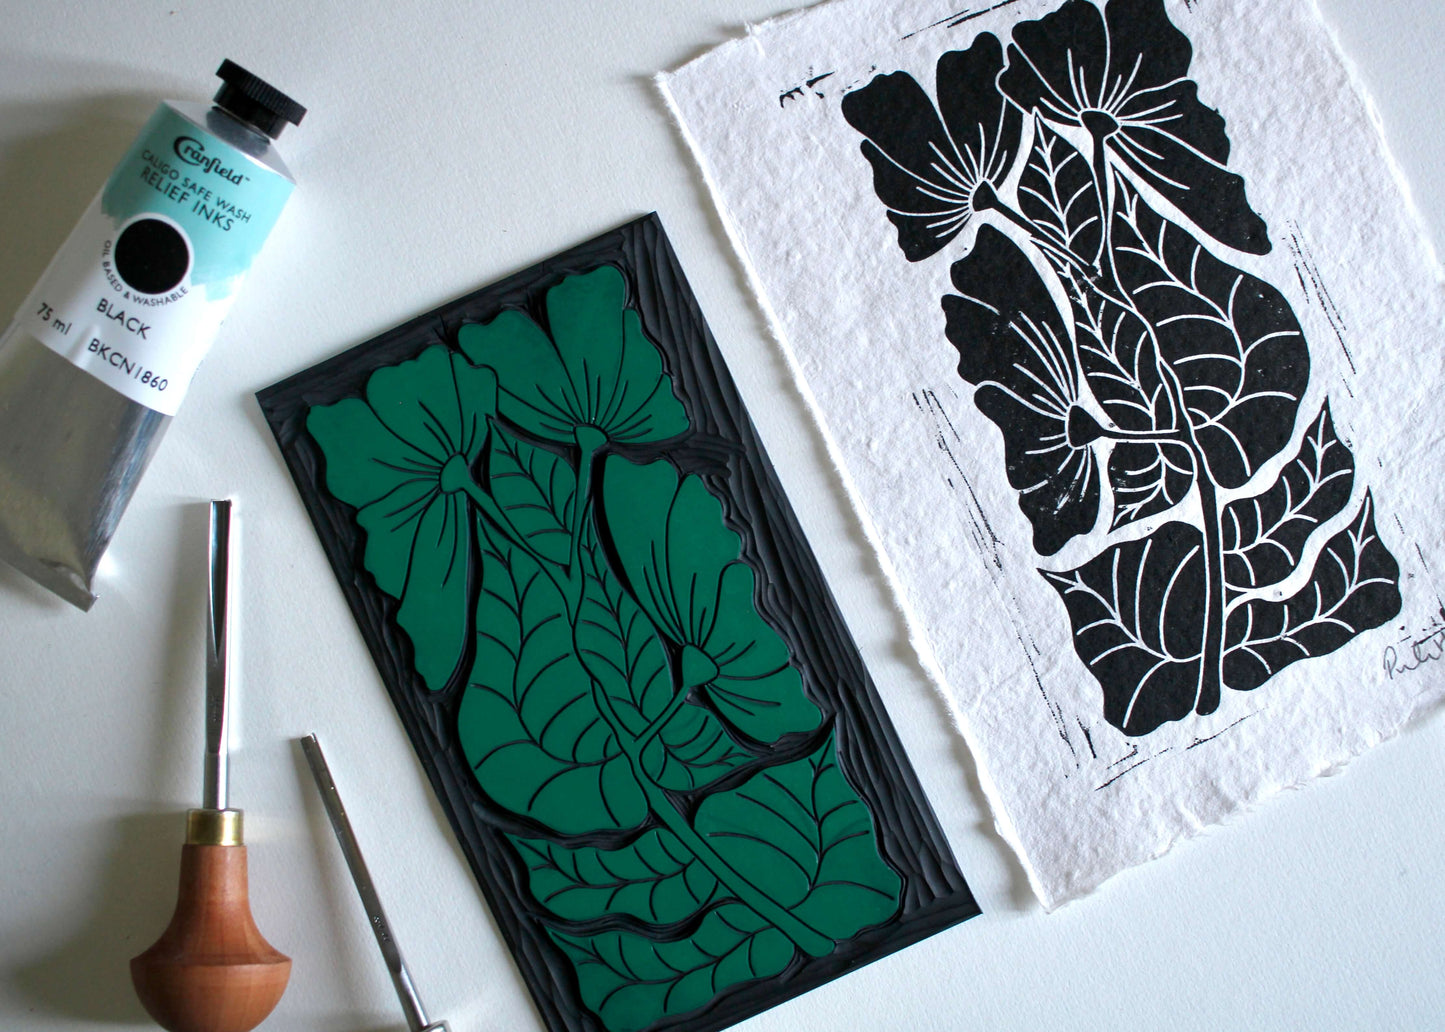 Hand Printed Tall Abstract Floral Linocut on Cotton Rag Paper